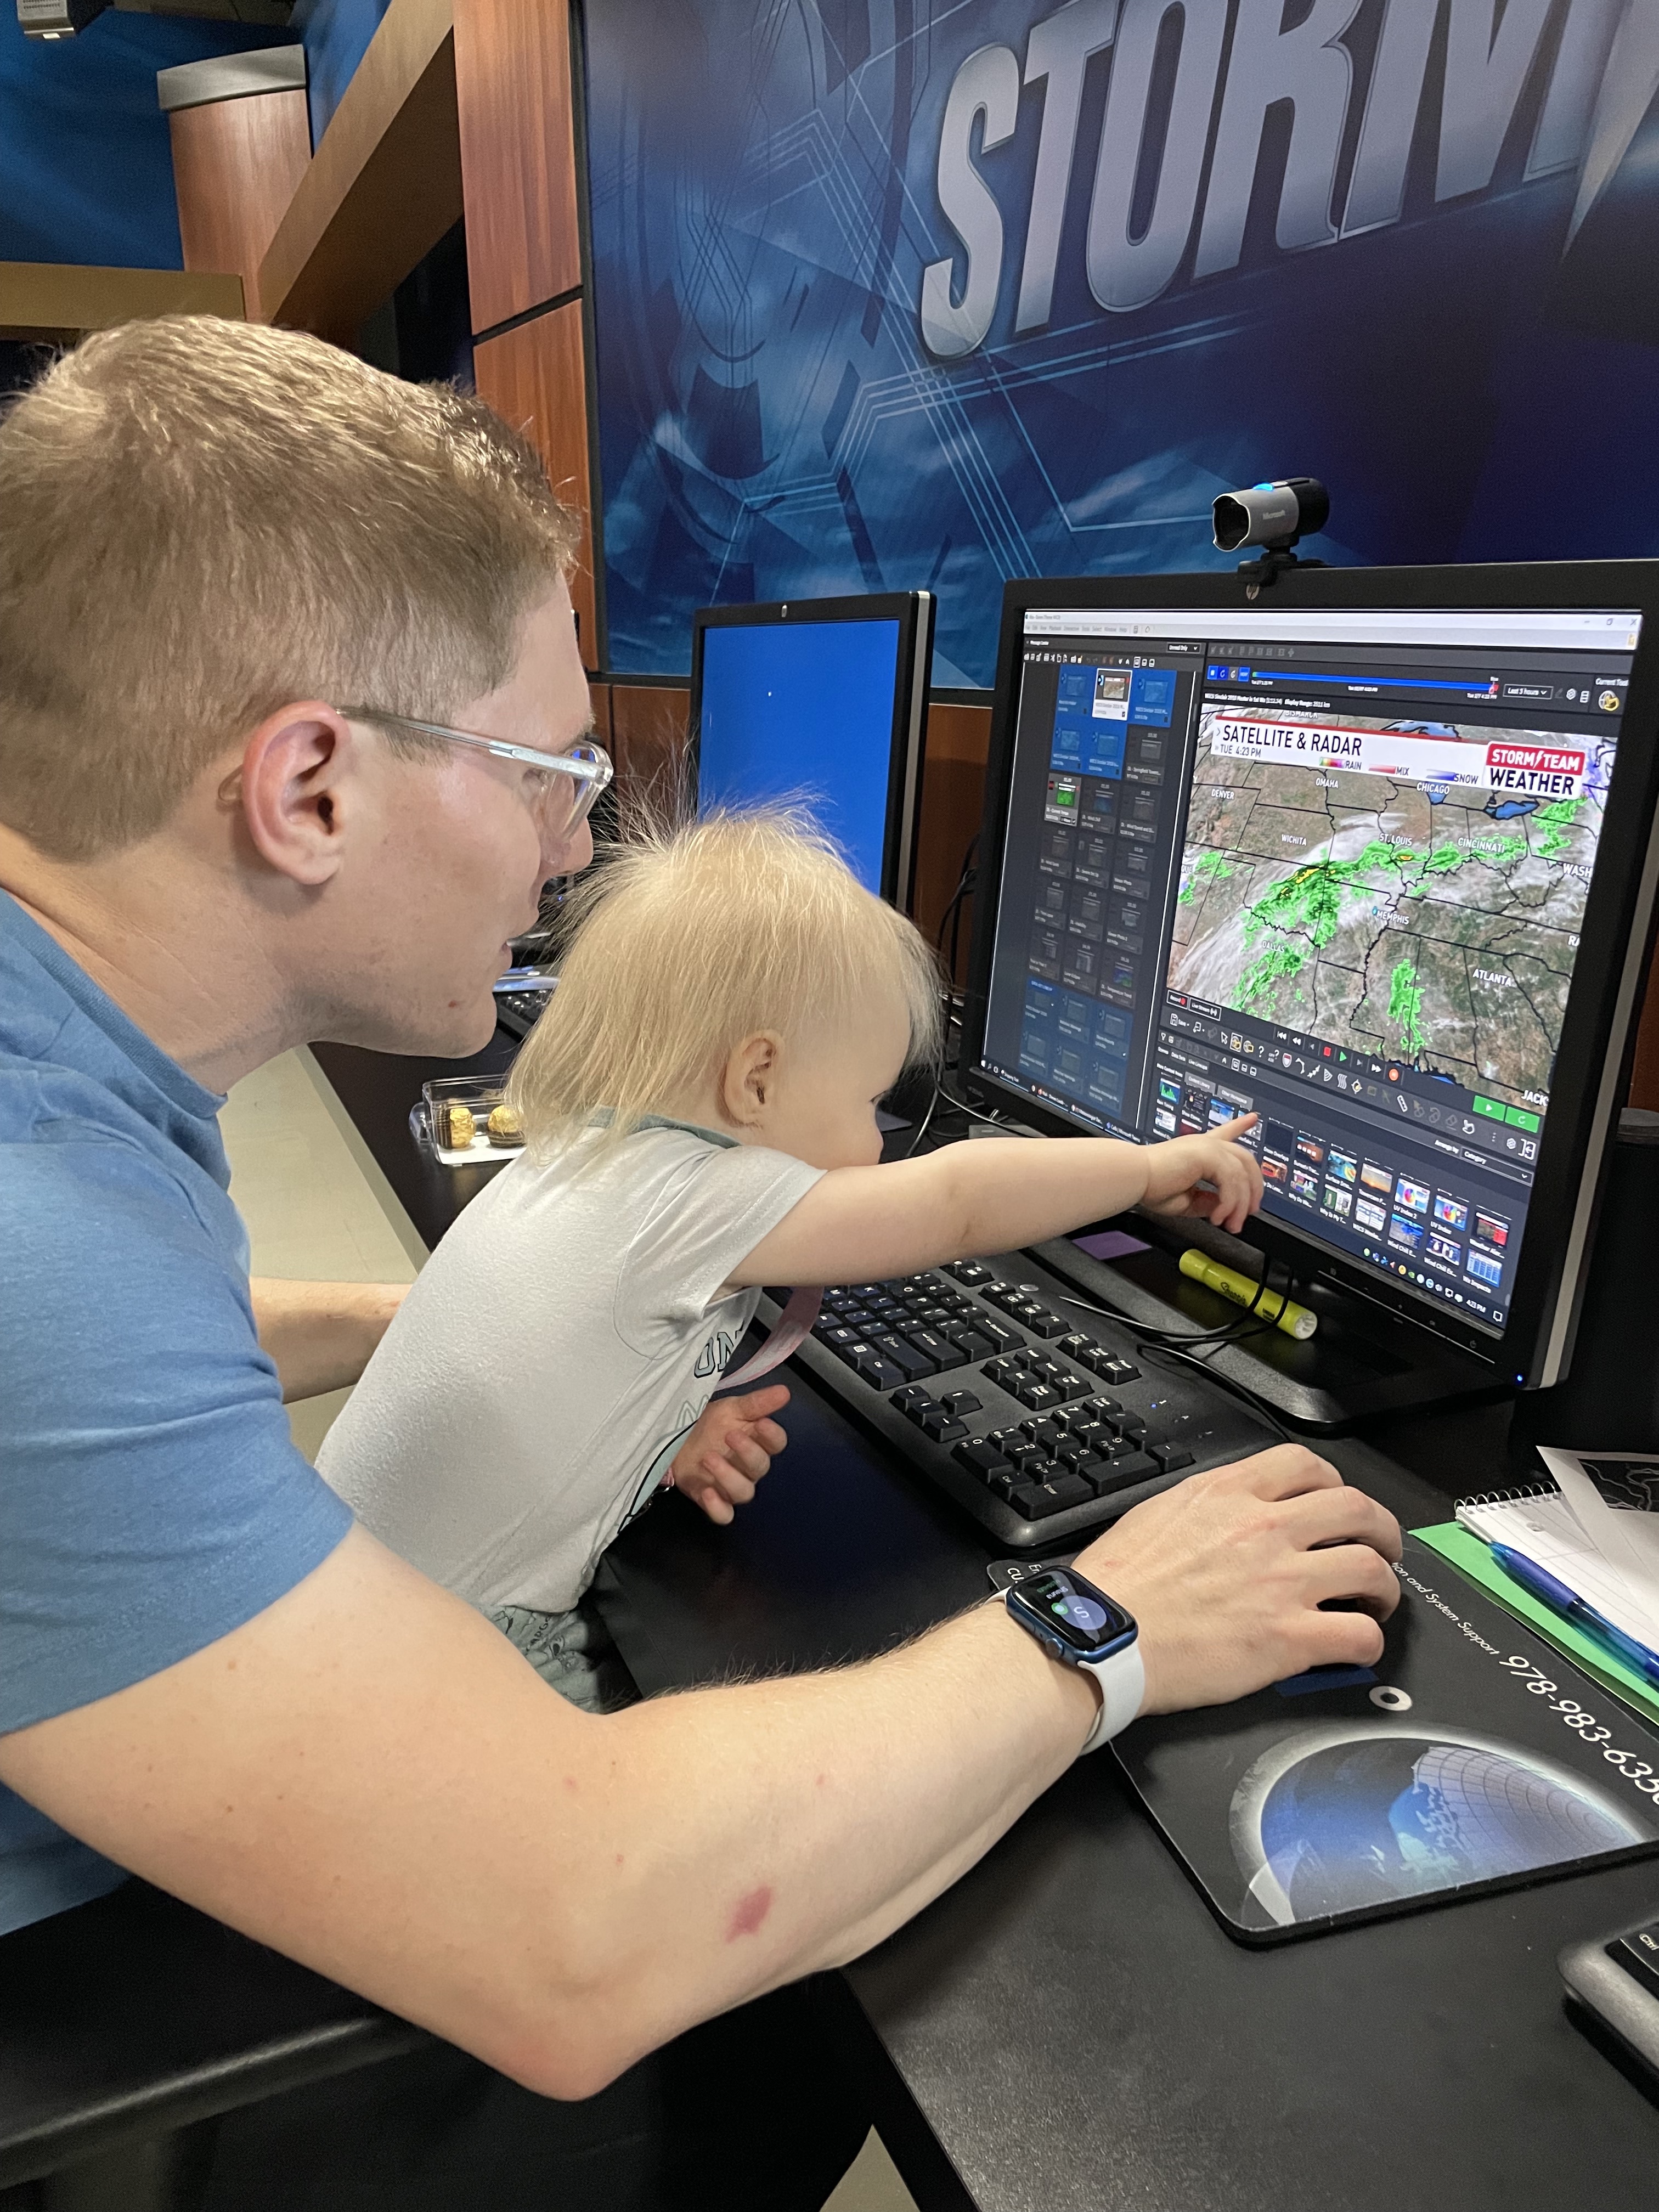 Former “SkyWatch” Forecaster, Darren Leeds (’11), shows his daughter, age 2, the graphics for his show at WCCU in Champaign, Illinois. Photo used with Permission.